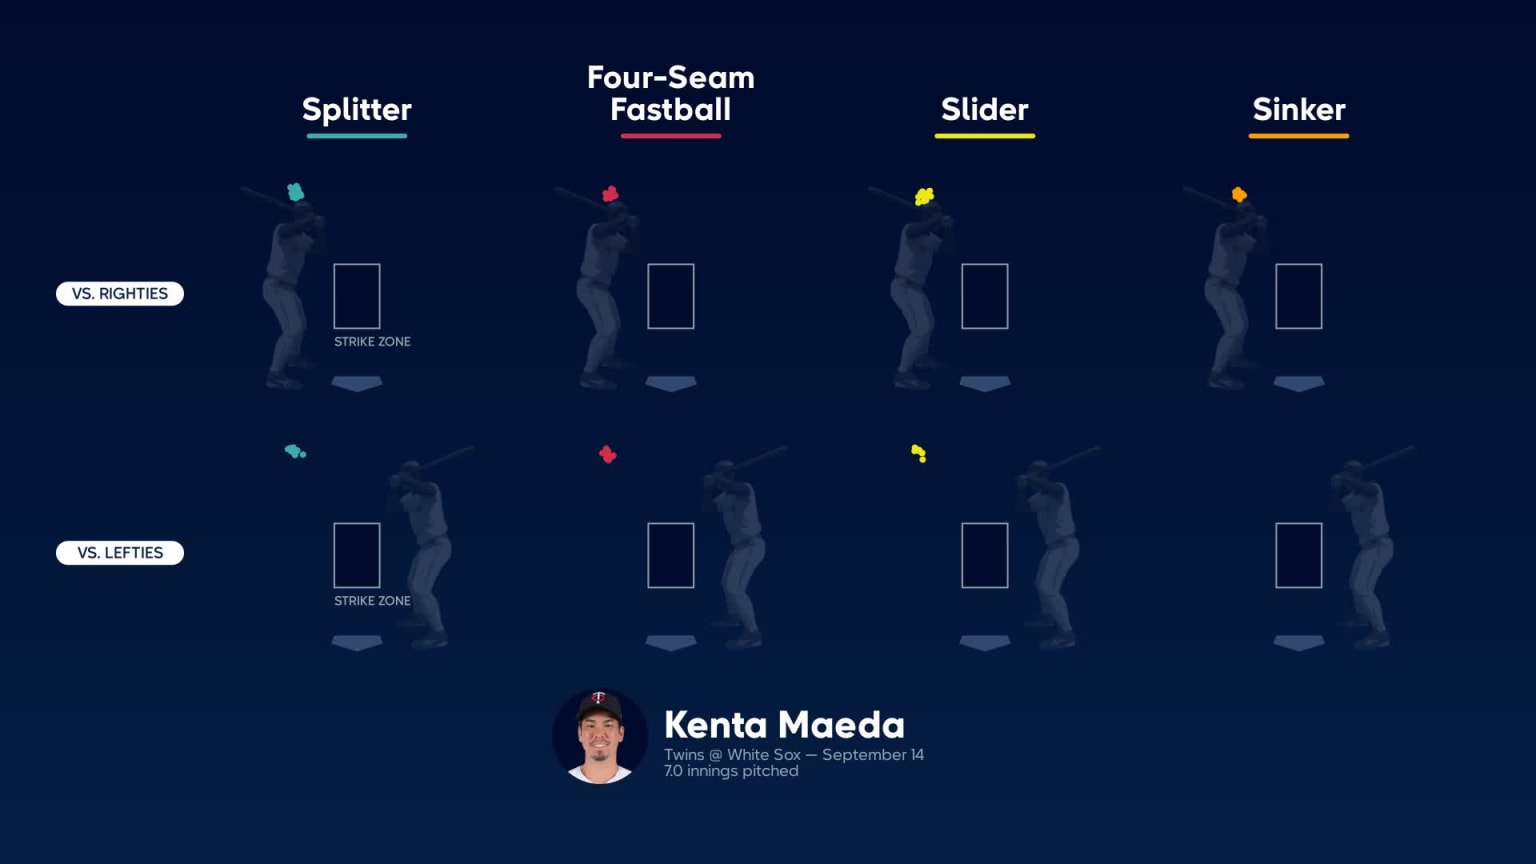 Kenta Maeda, Statcast, and what it means for the Twins - Twinkie Town